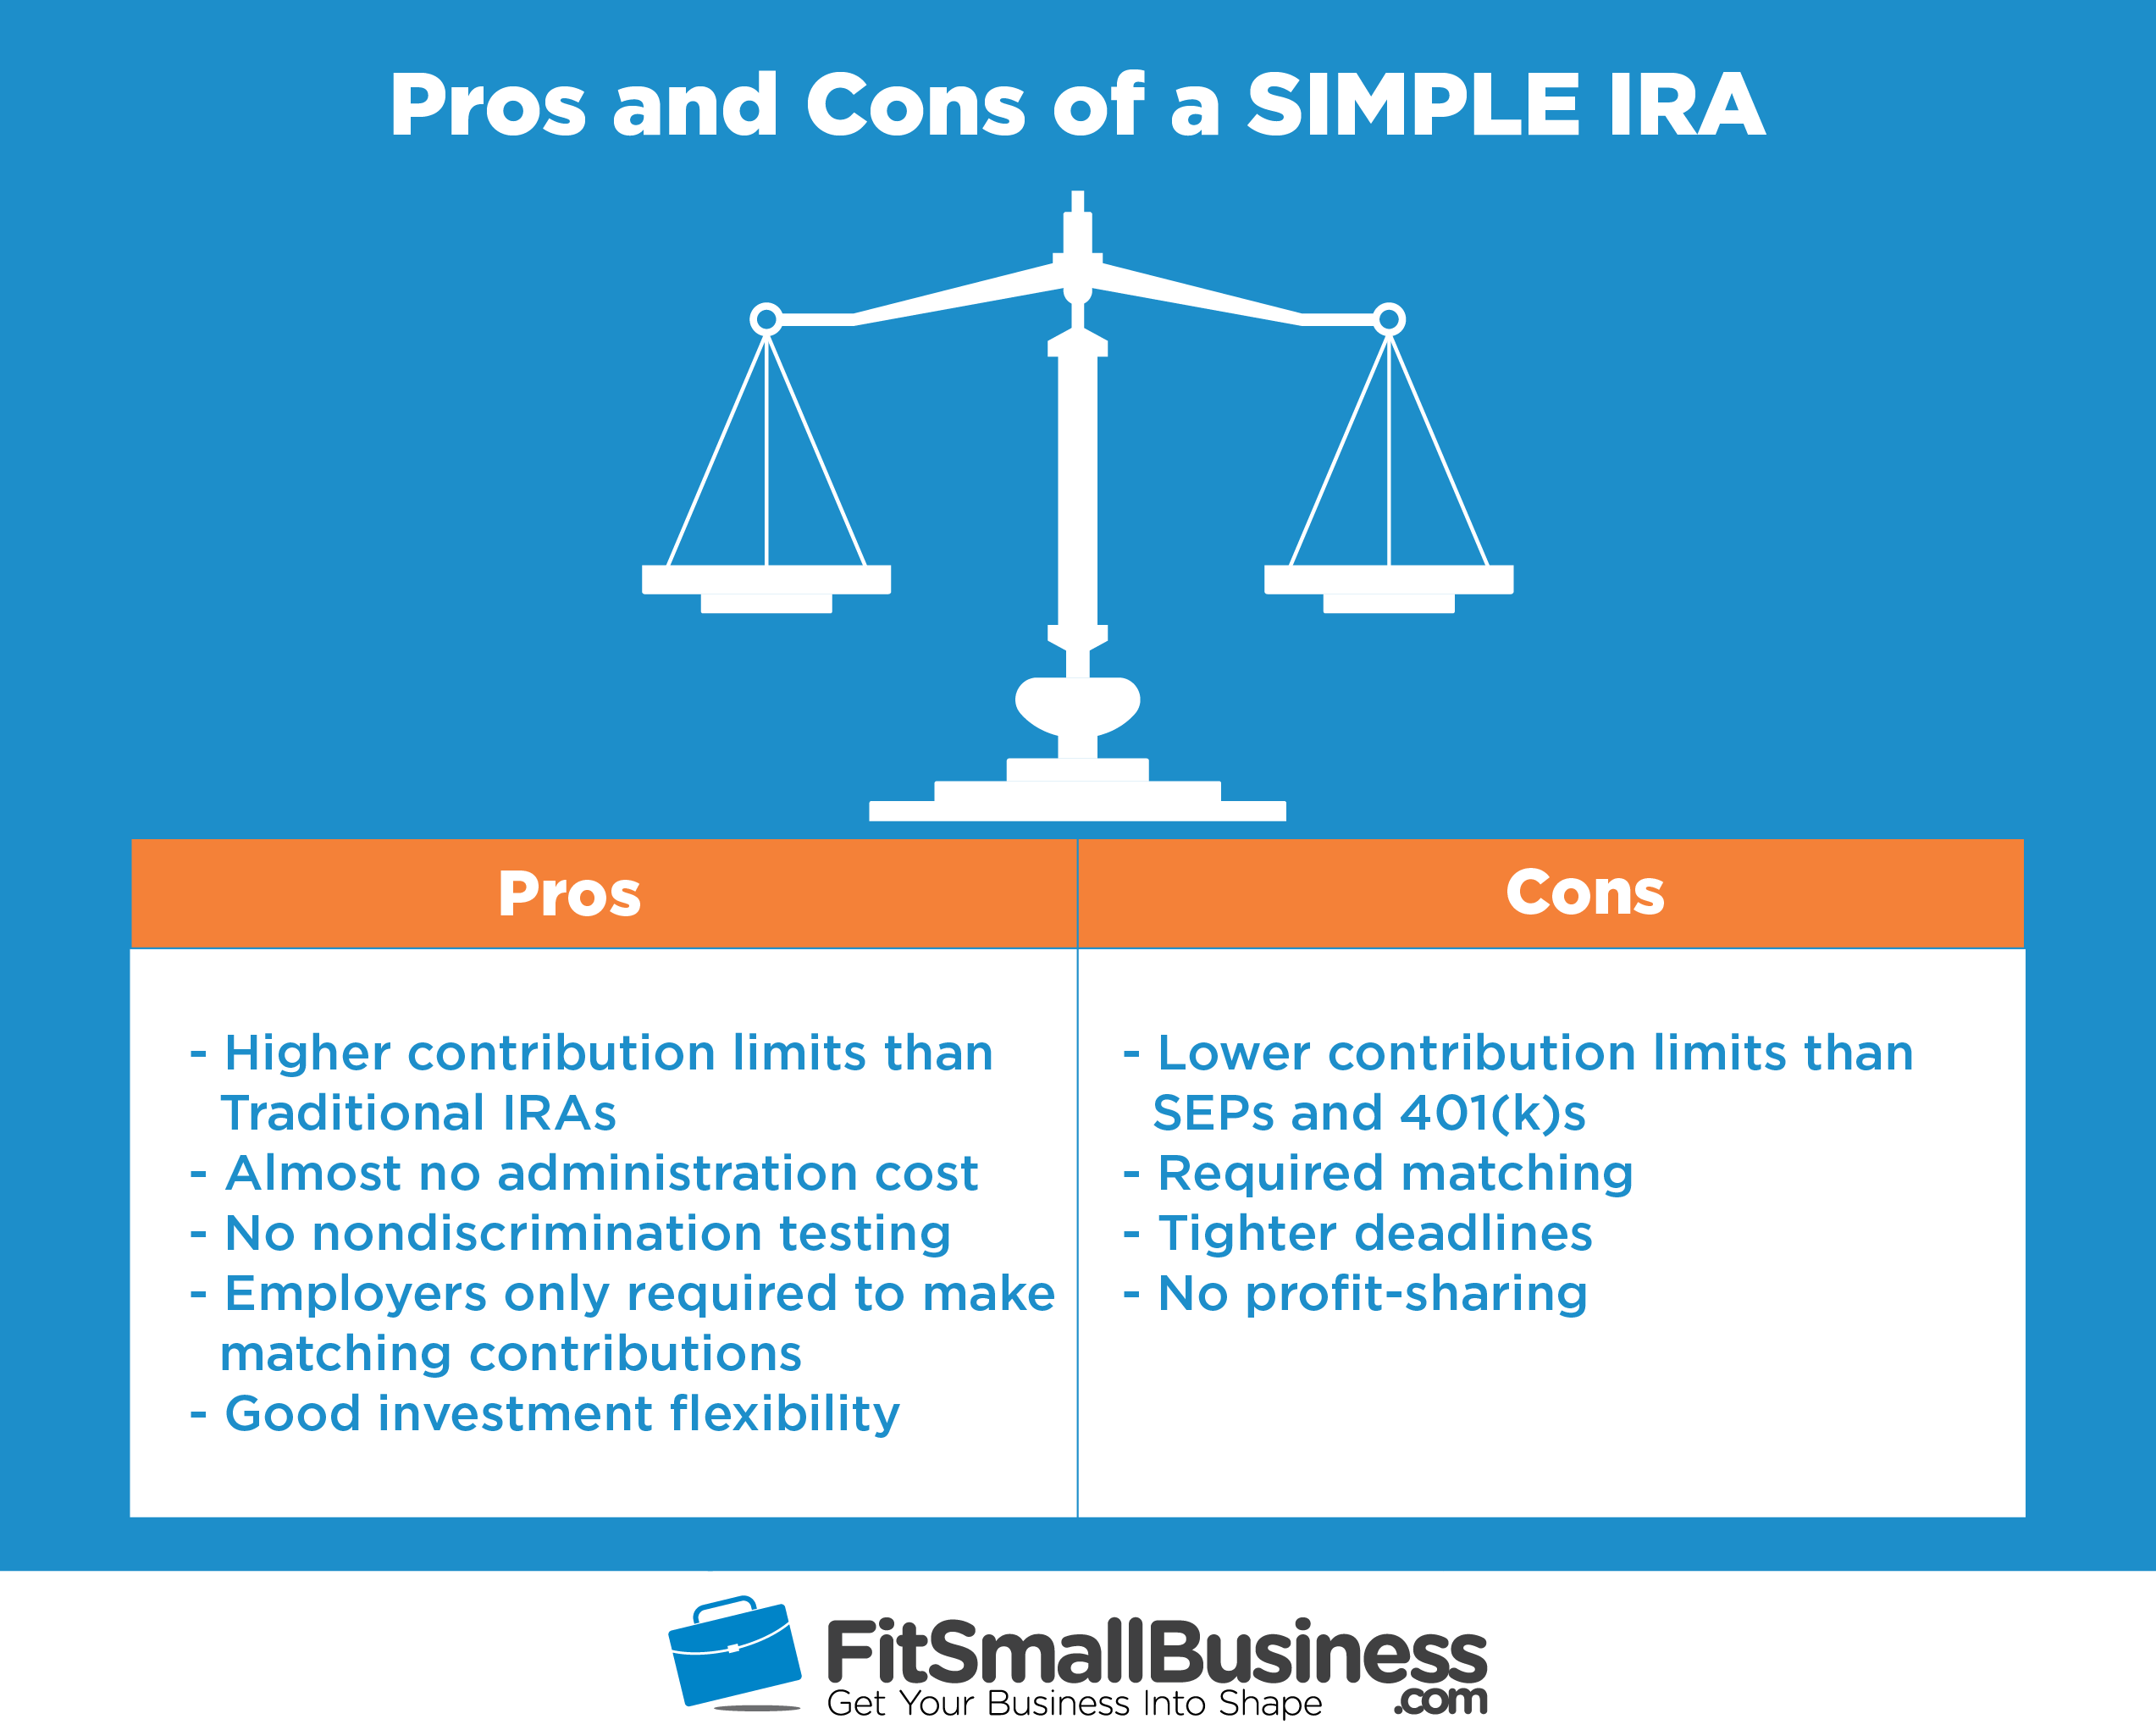 Pros and Cons of a Simple IRA